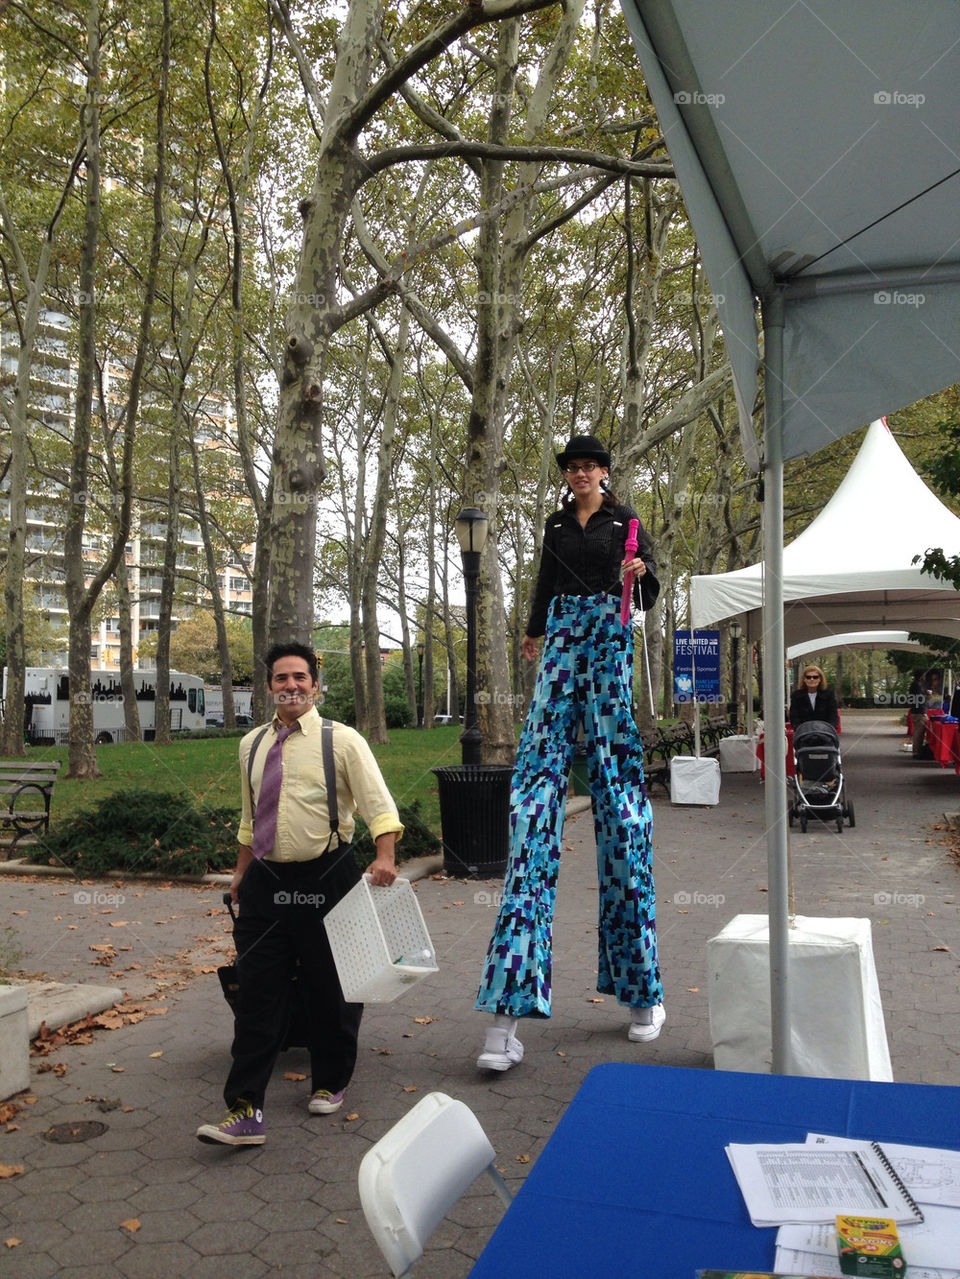 Performers set up for the United Way festival in Brooklyn, NY